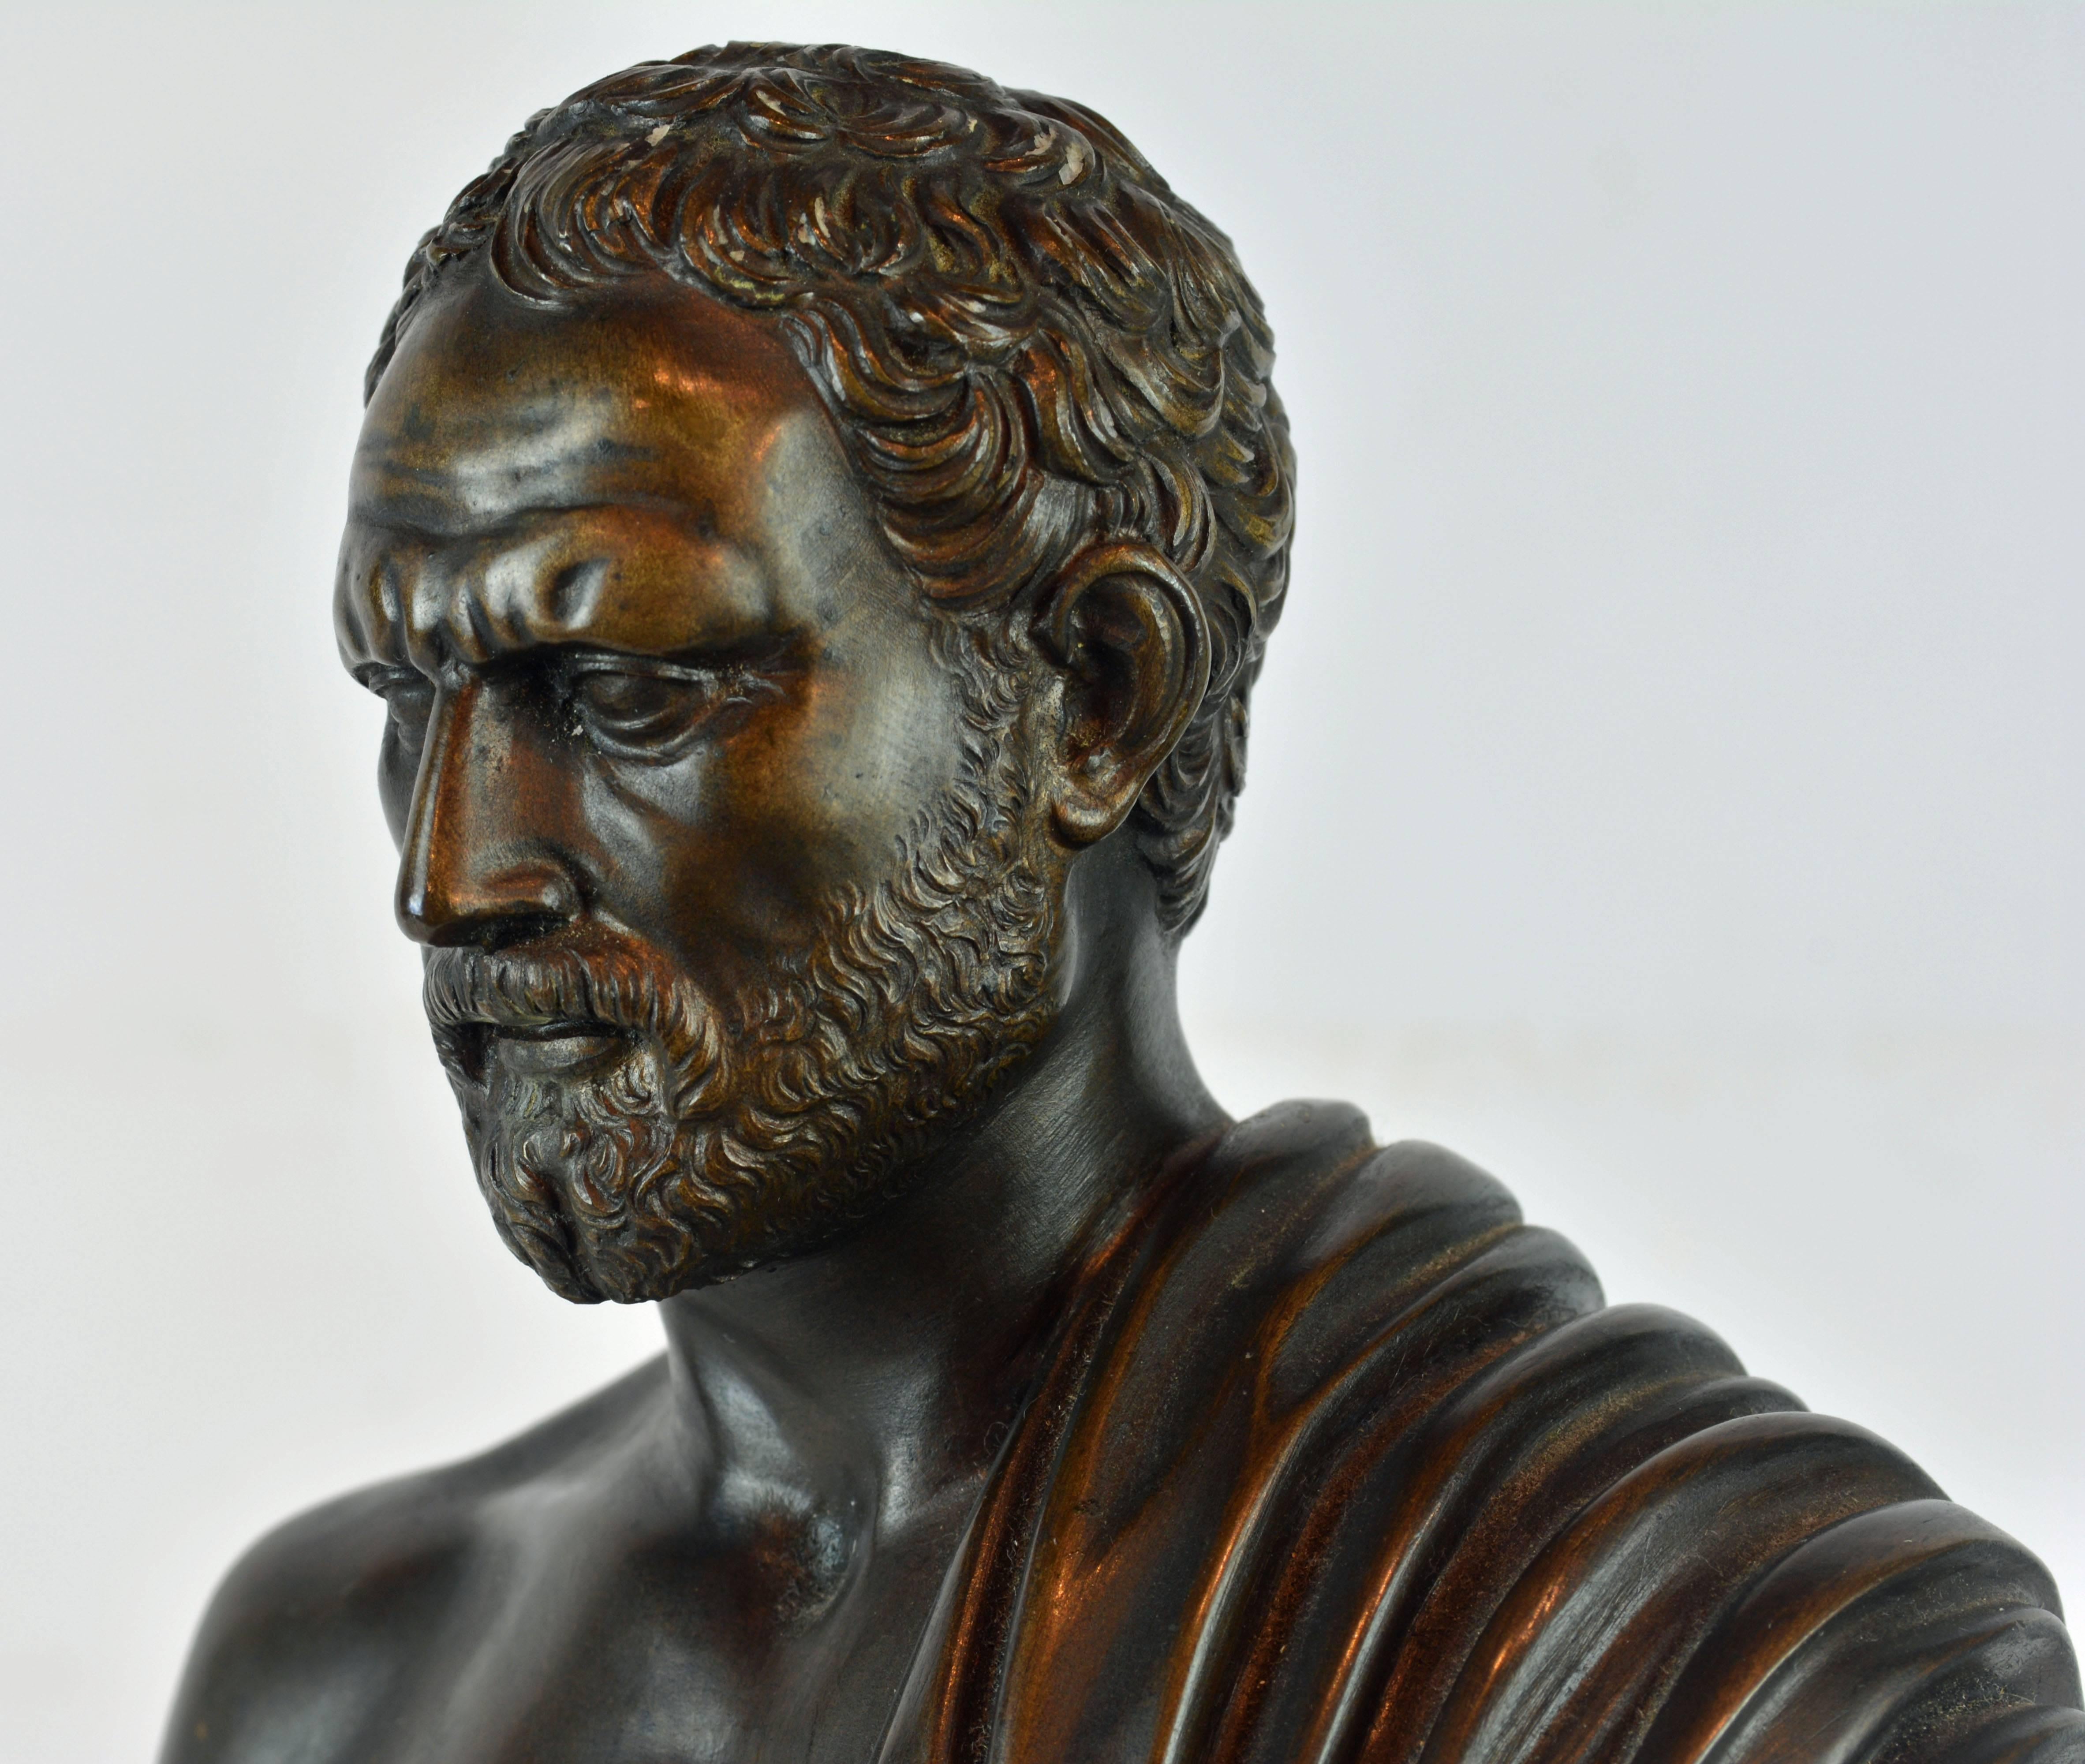 Classical Roman Classical 19th Century Bronze Statue of Demosthenes by Rohrich Foundry in Rome